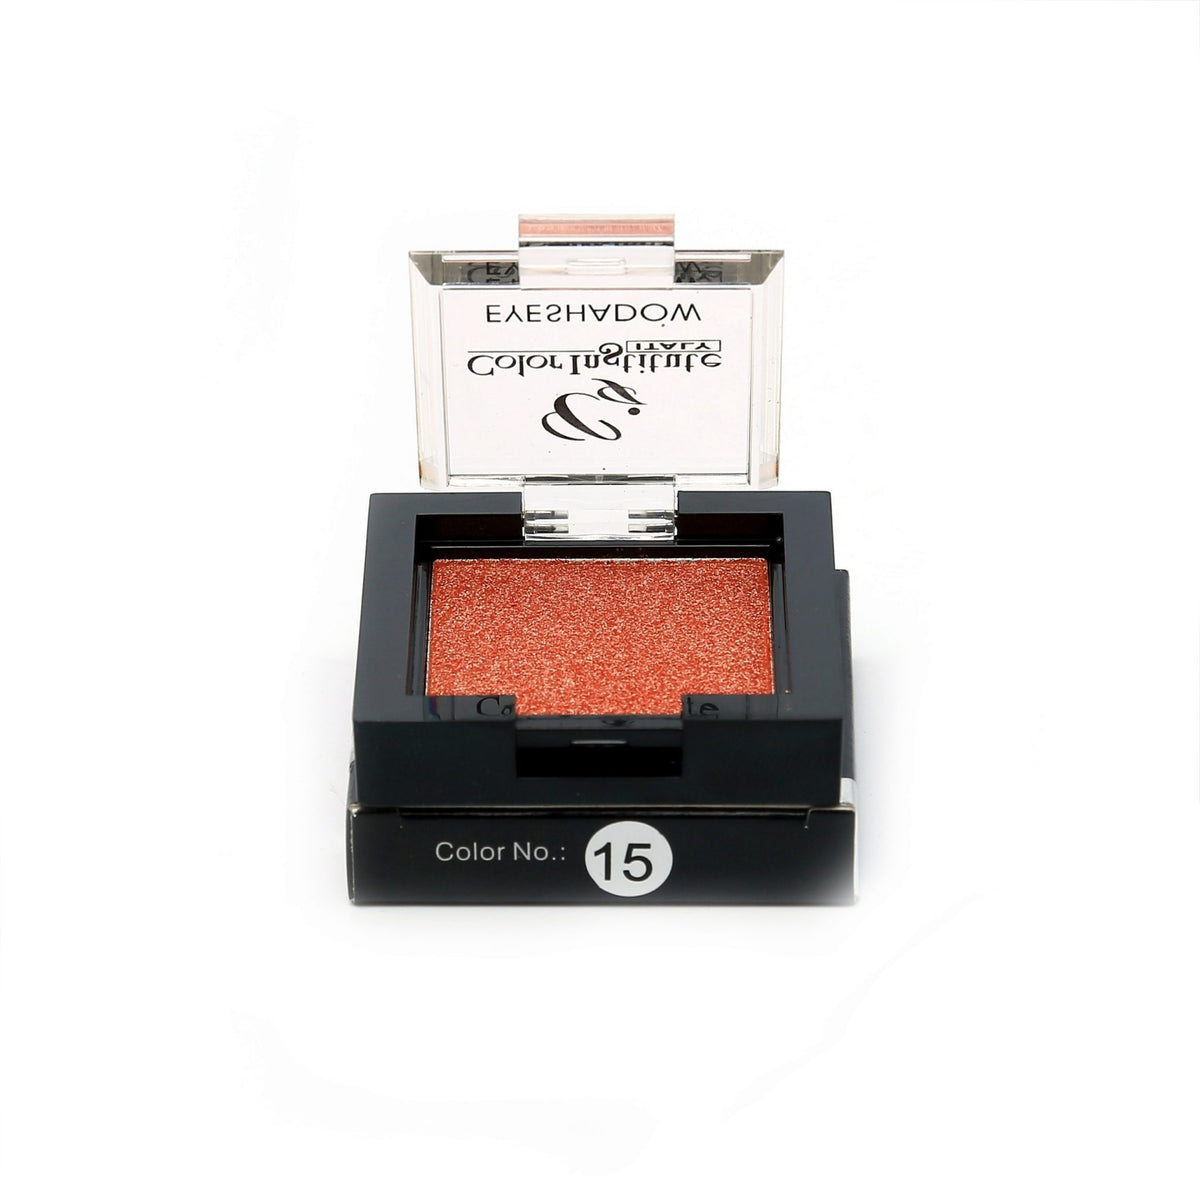 Color Institute Italy Eyeshadow Color freeshipping - lasertag.pk